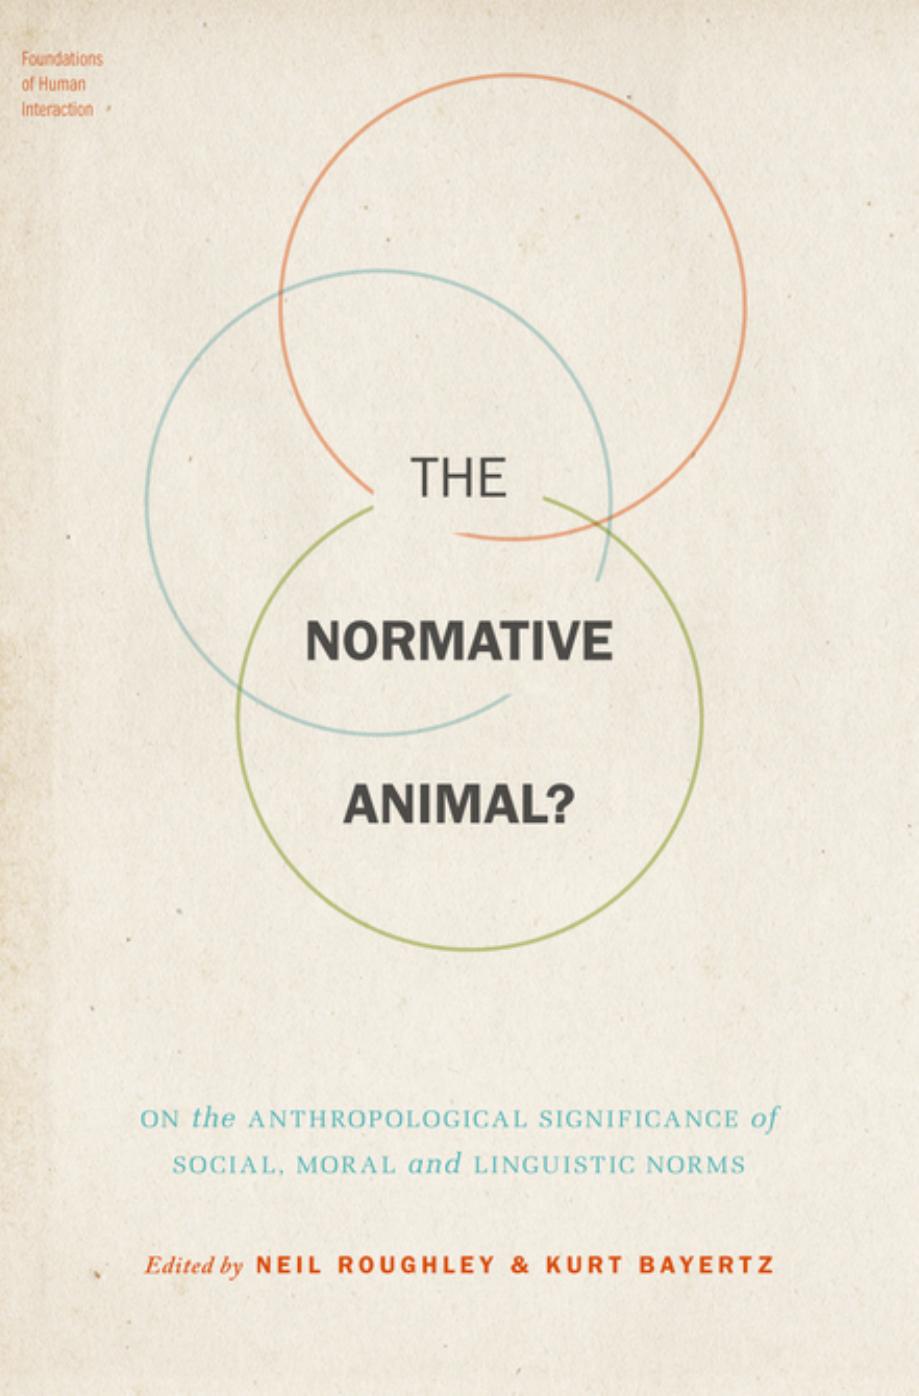 The Normative Animal?: On the Anthropological Significance of Social, Moral and Linguistic Norms